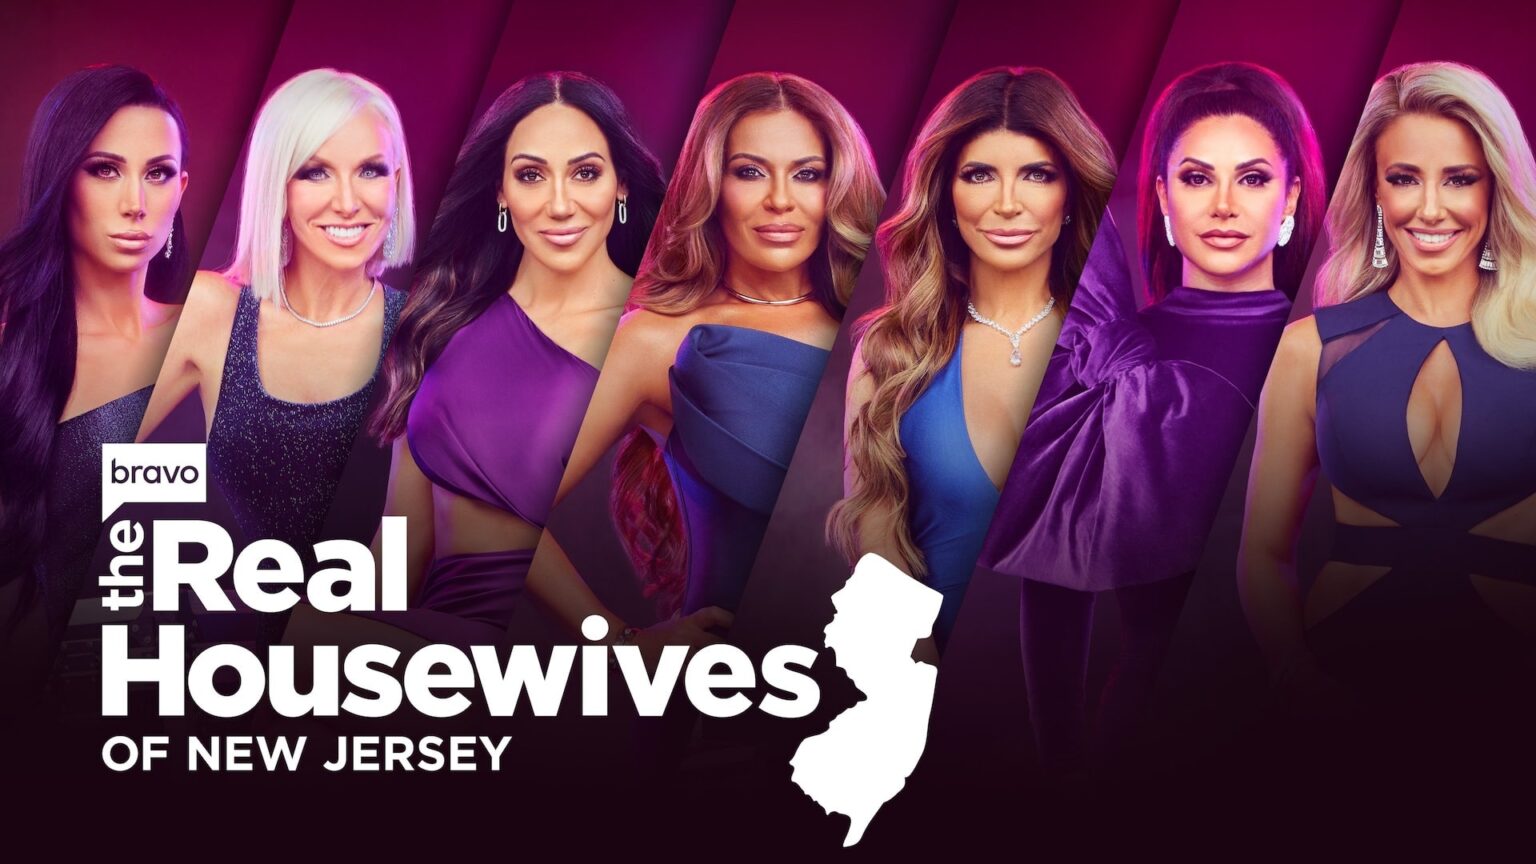 Get ready for the most explosive catfights yet in 'RHONJ' Season 13! Dive into the drama as Teresa, Melissa, and Dolores' loyalties are tested.